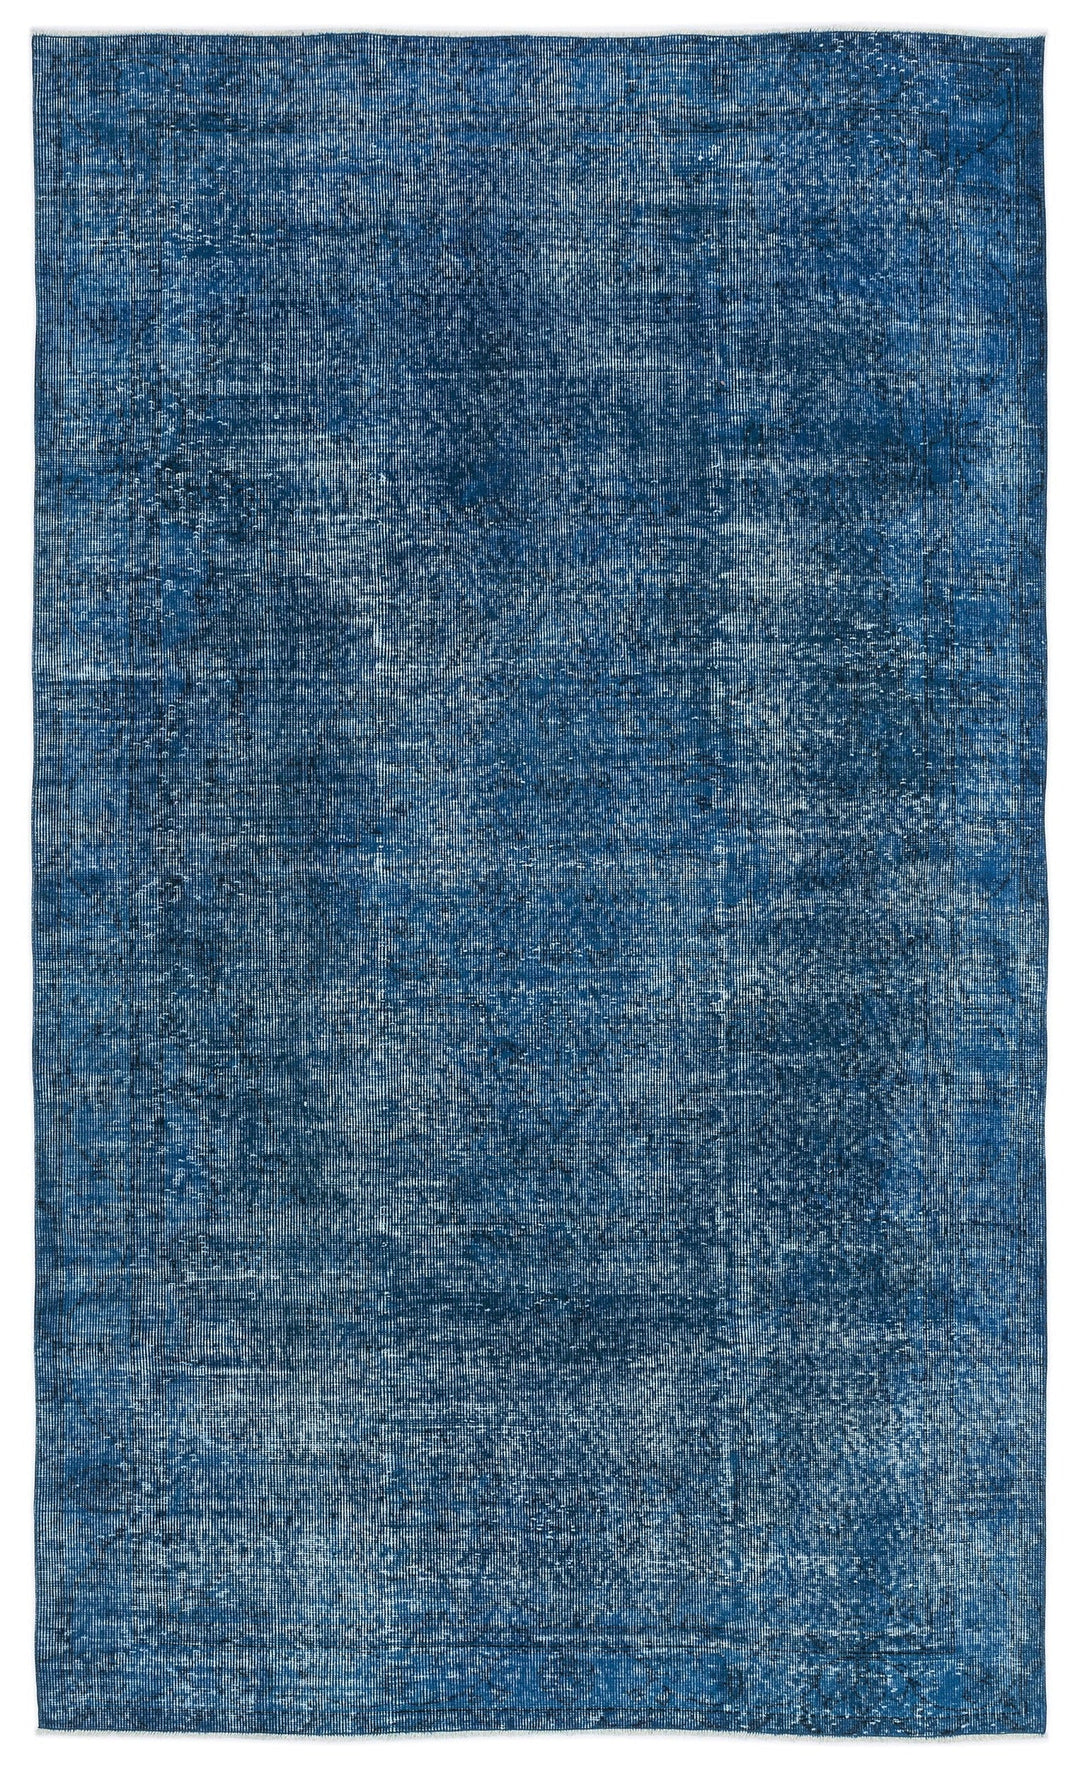 Athens Turquoise Tumbled Wool Hand Woven Carpet 161 x 275